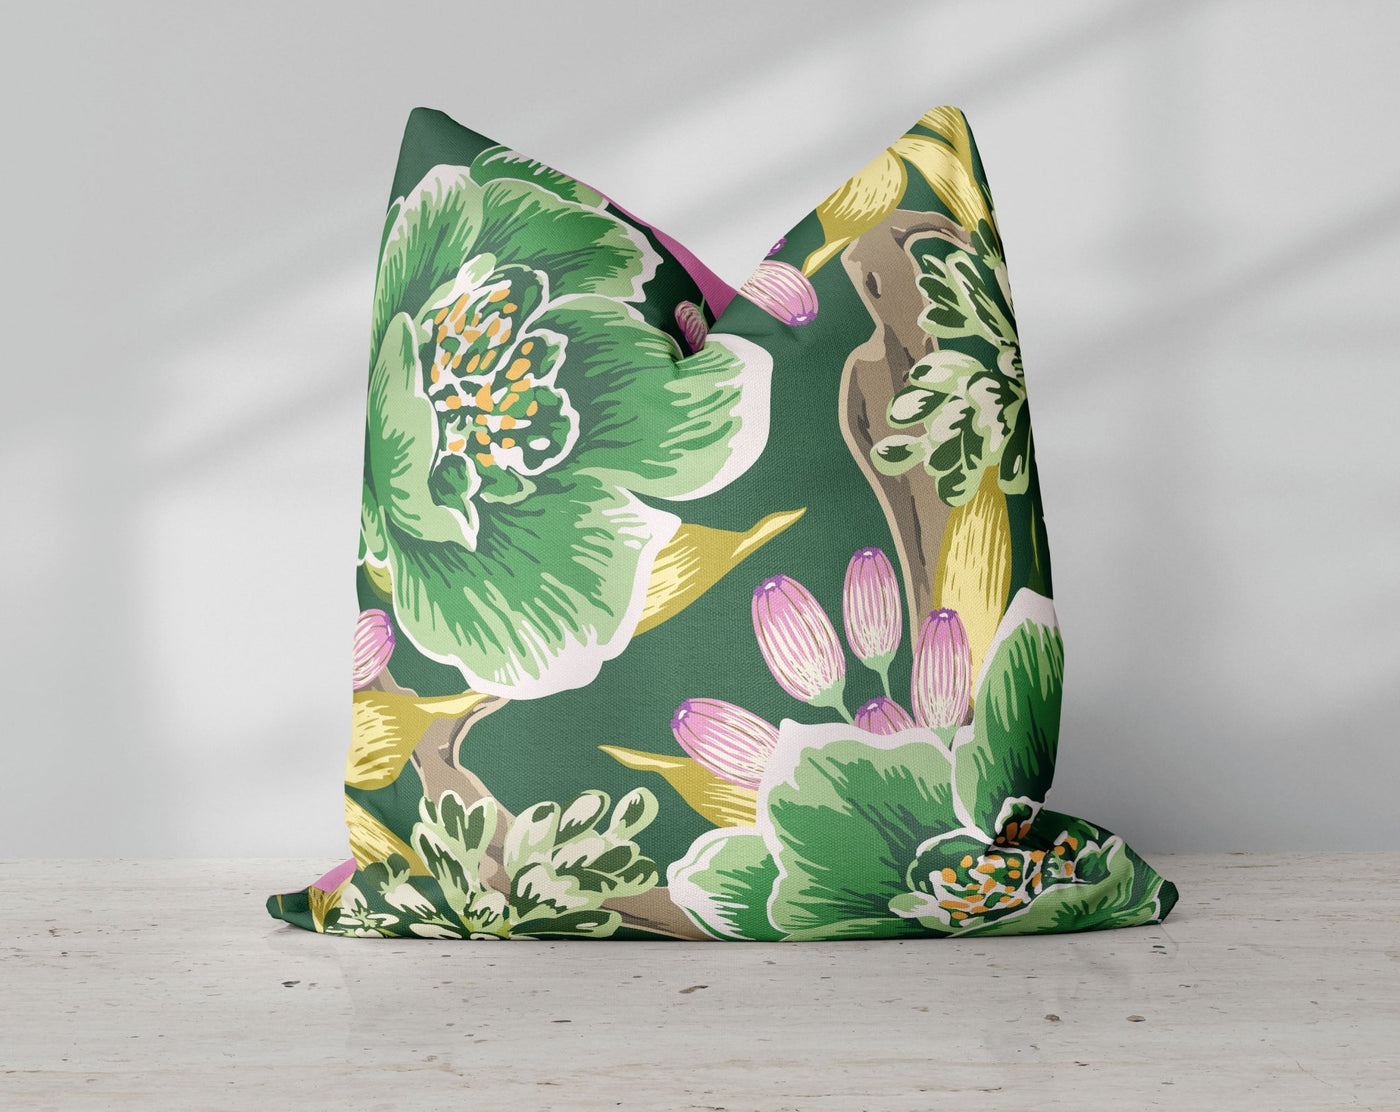 Exclusive Floral Green and Pink Thibaut Inspired Pillow Throw Cover